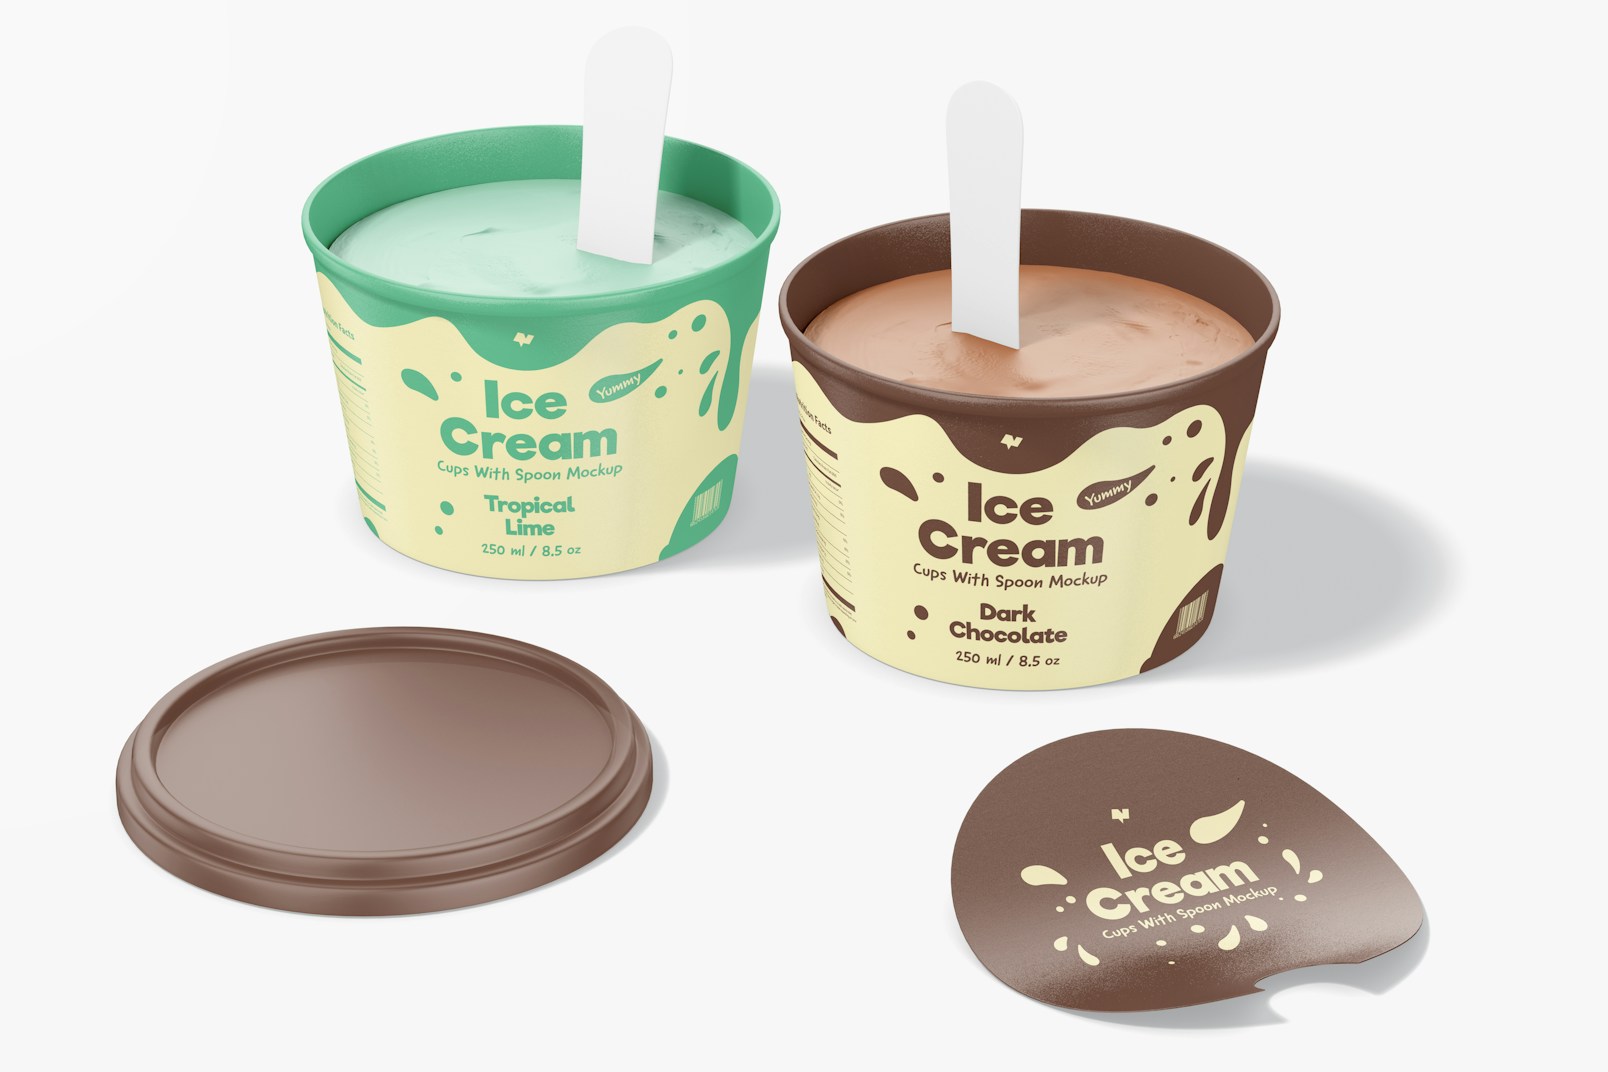 Ice Cream Cups With Spoon Mockup, Opened